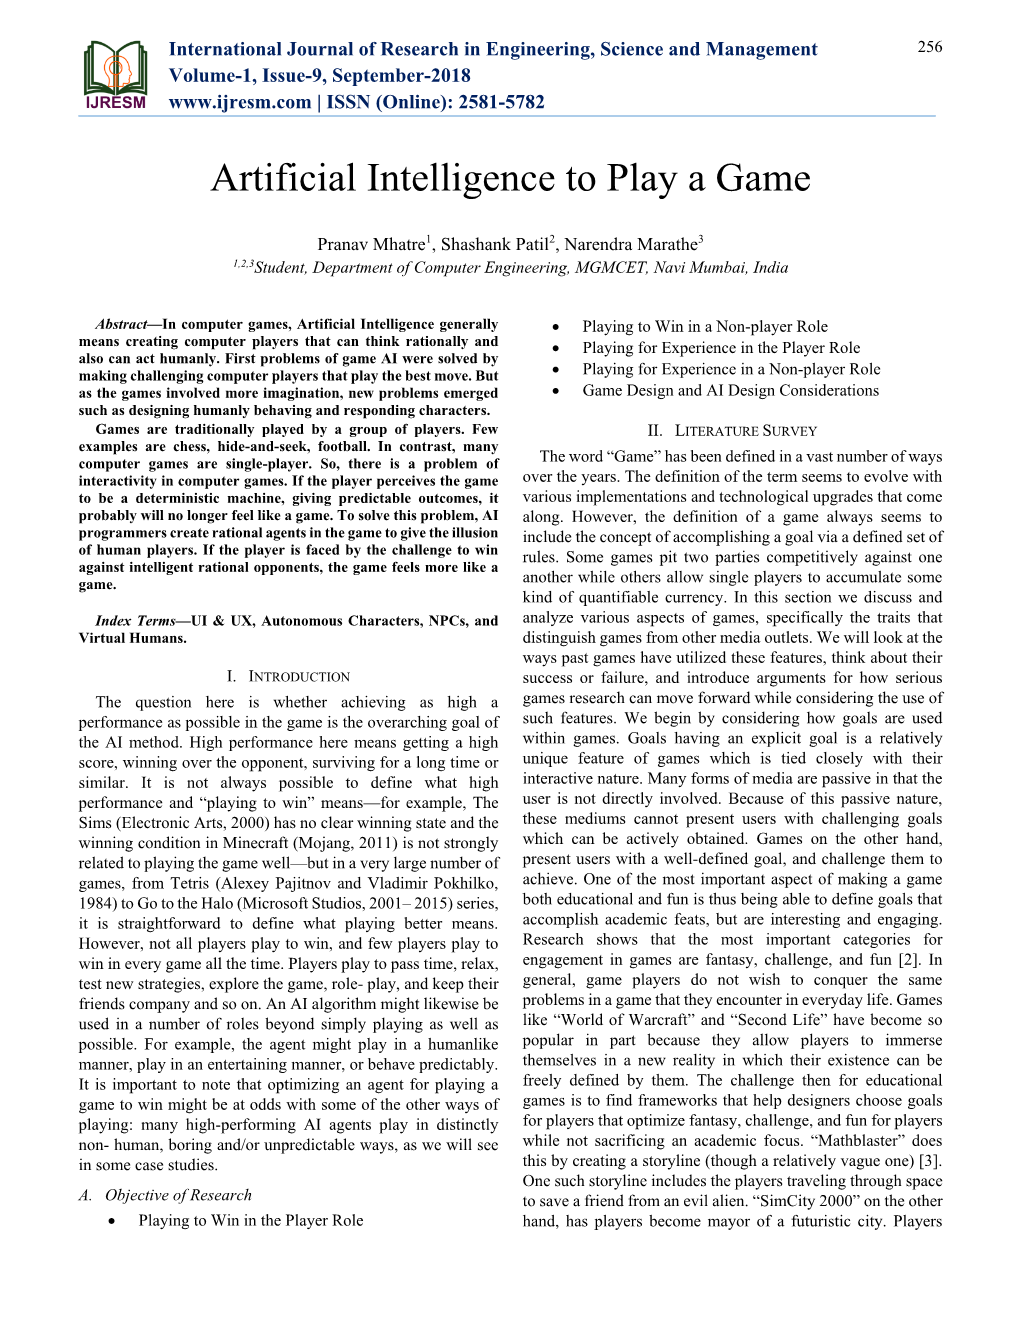 Artificial Intelligence to Play a Game